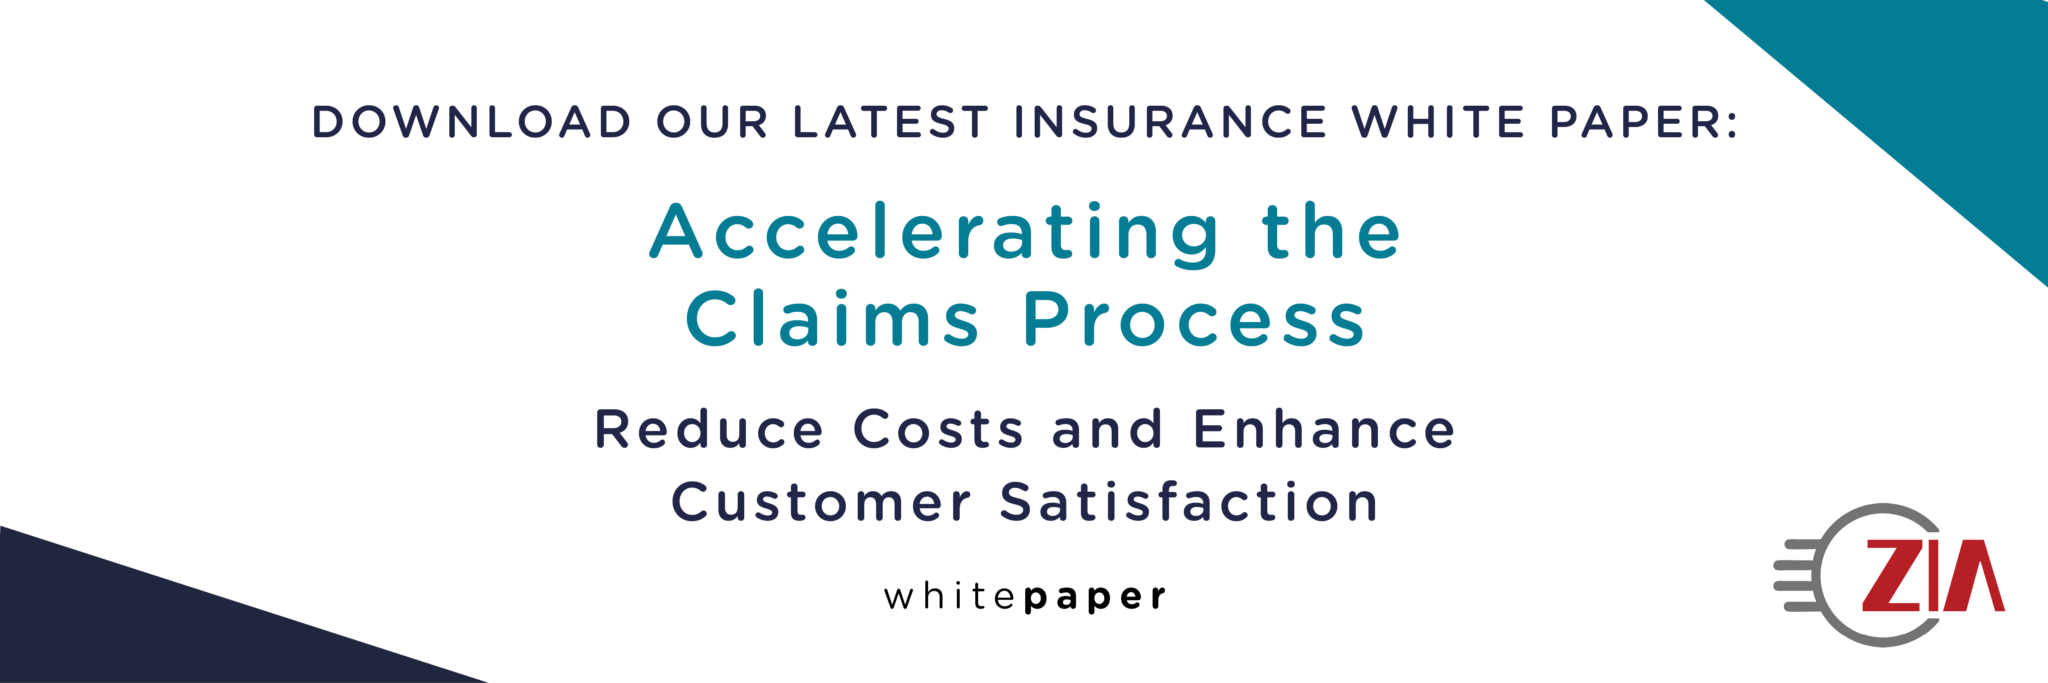 White Paper: Accelerating the Claims Process